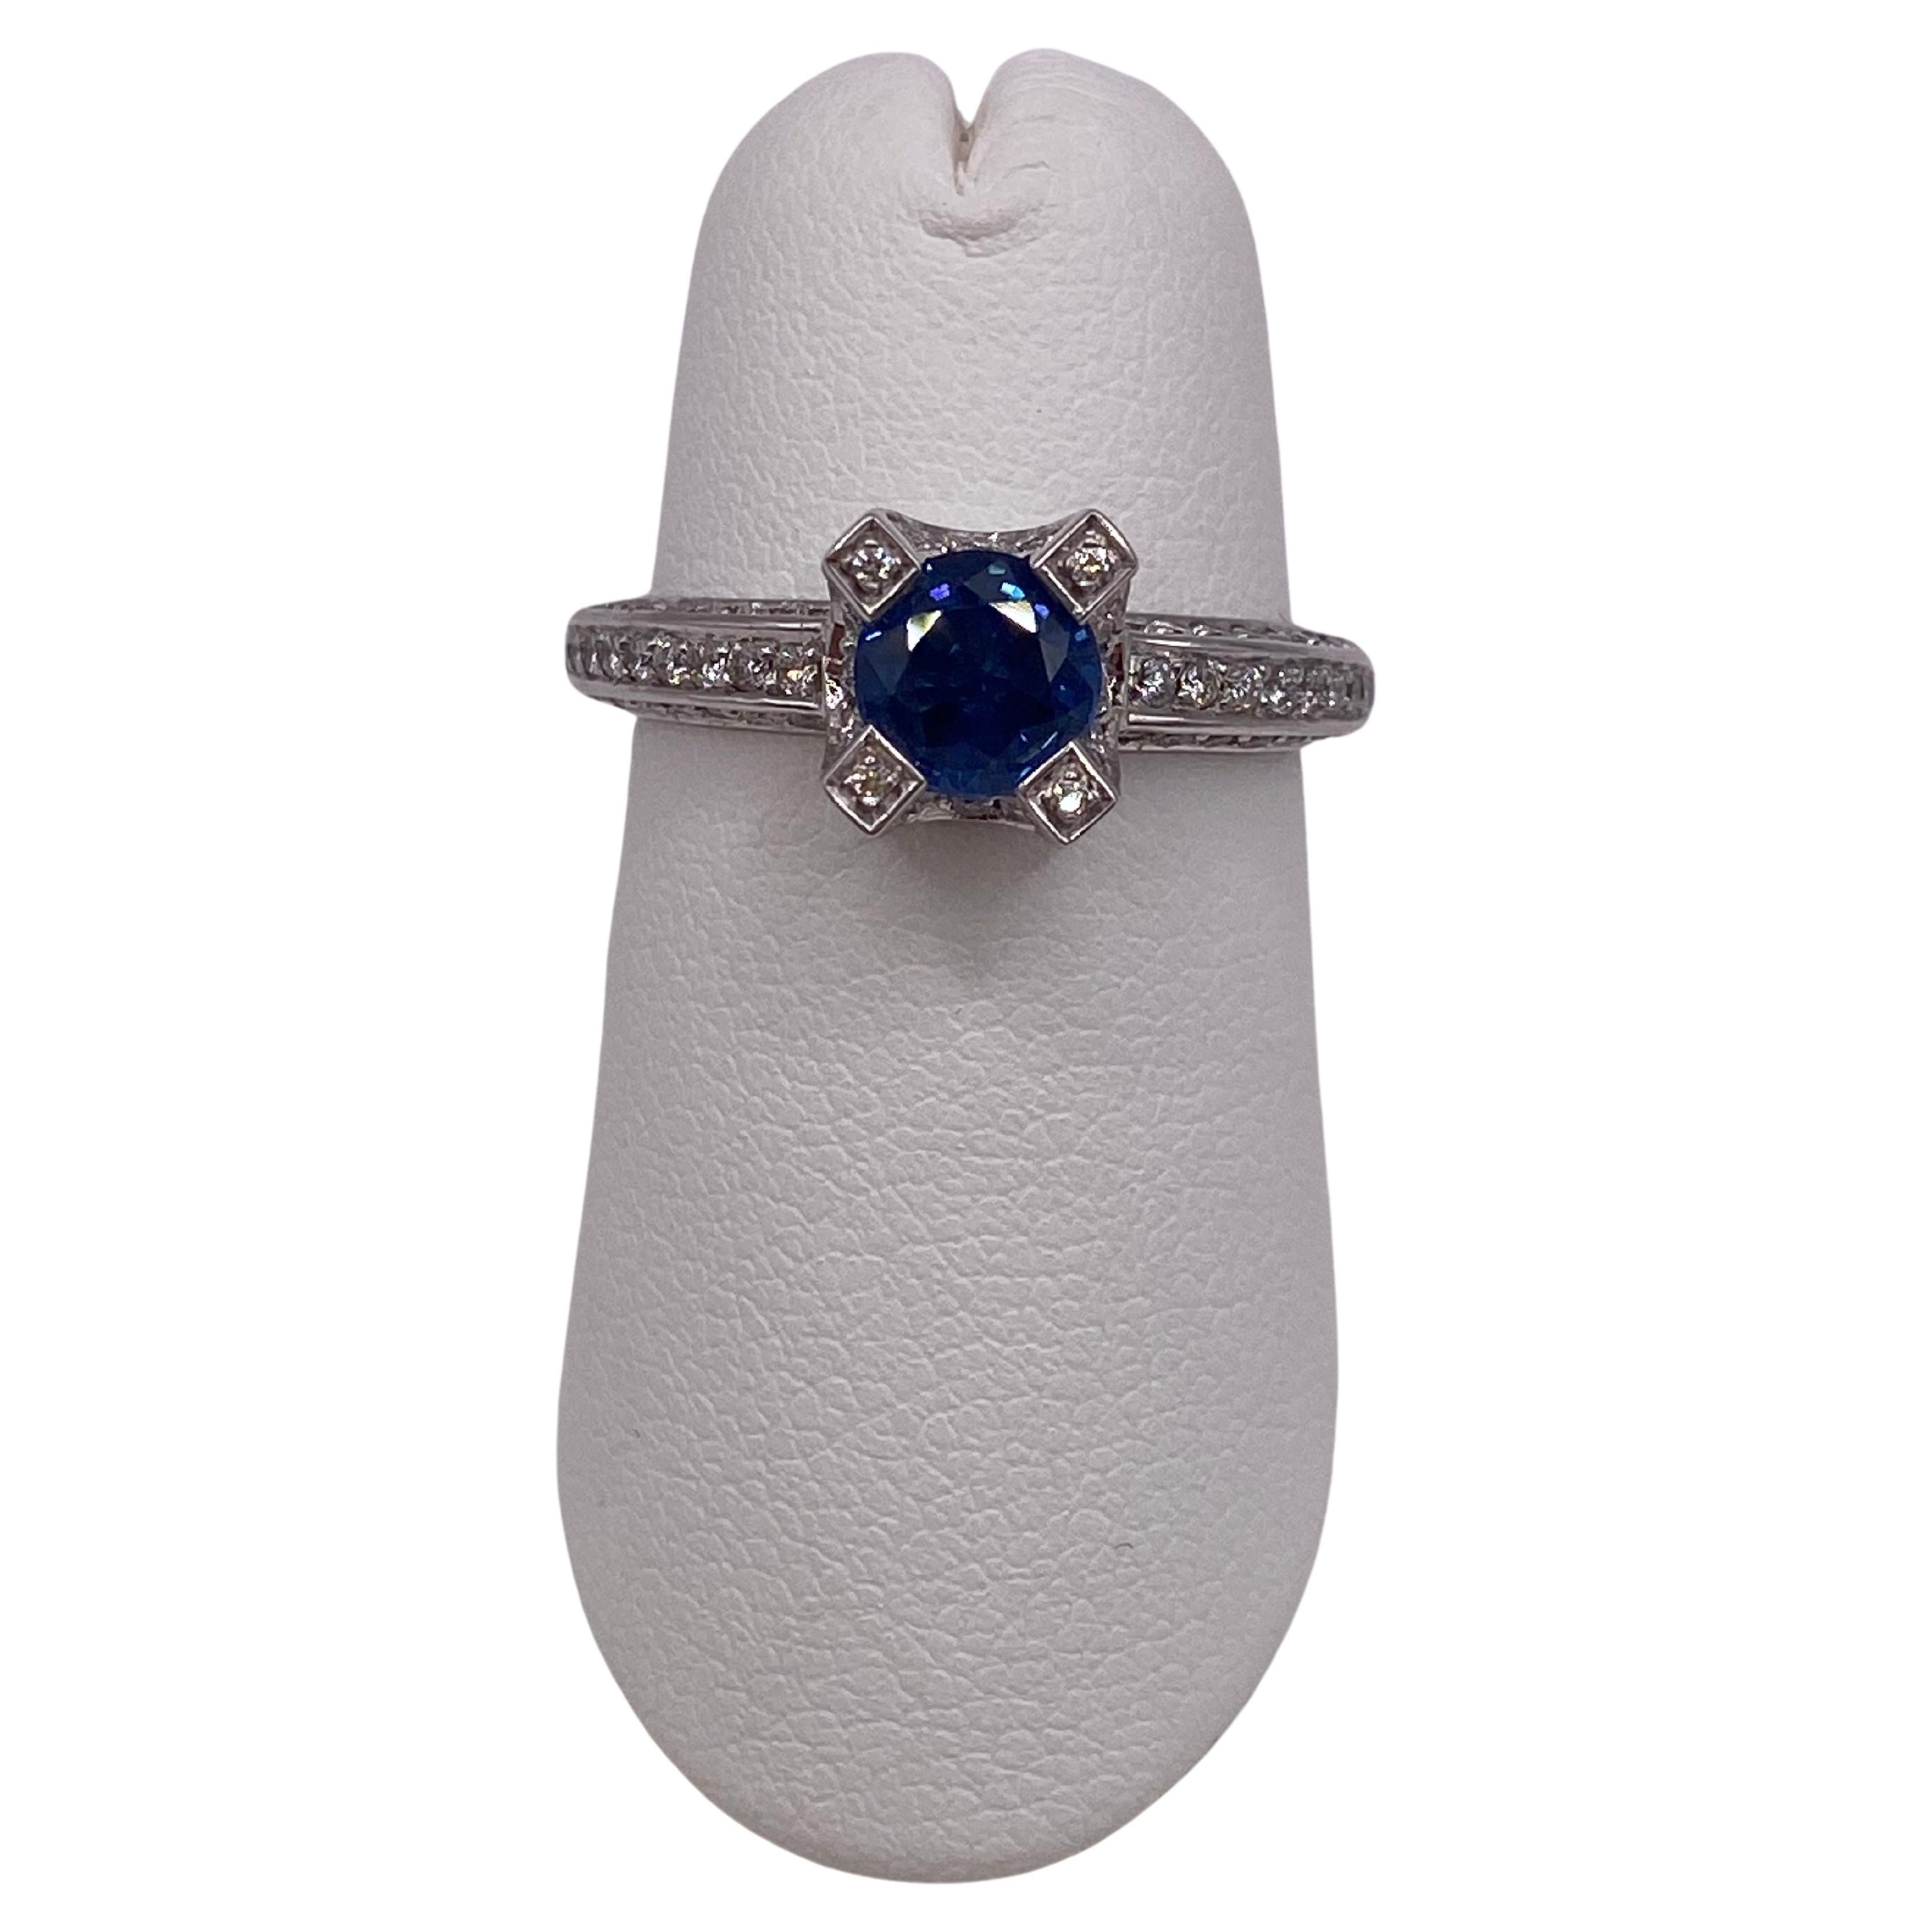 1.67ctw Sapphire & Diamond Pave Set Ring in 14KT White Gold